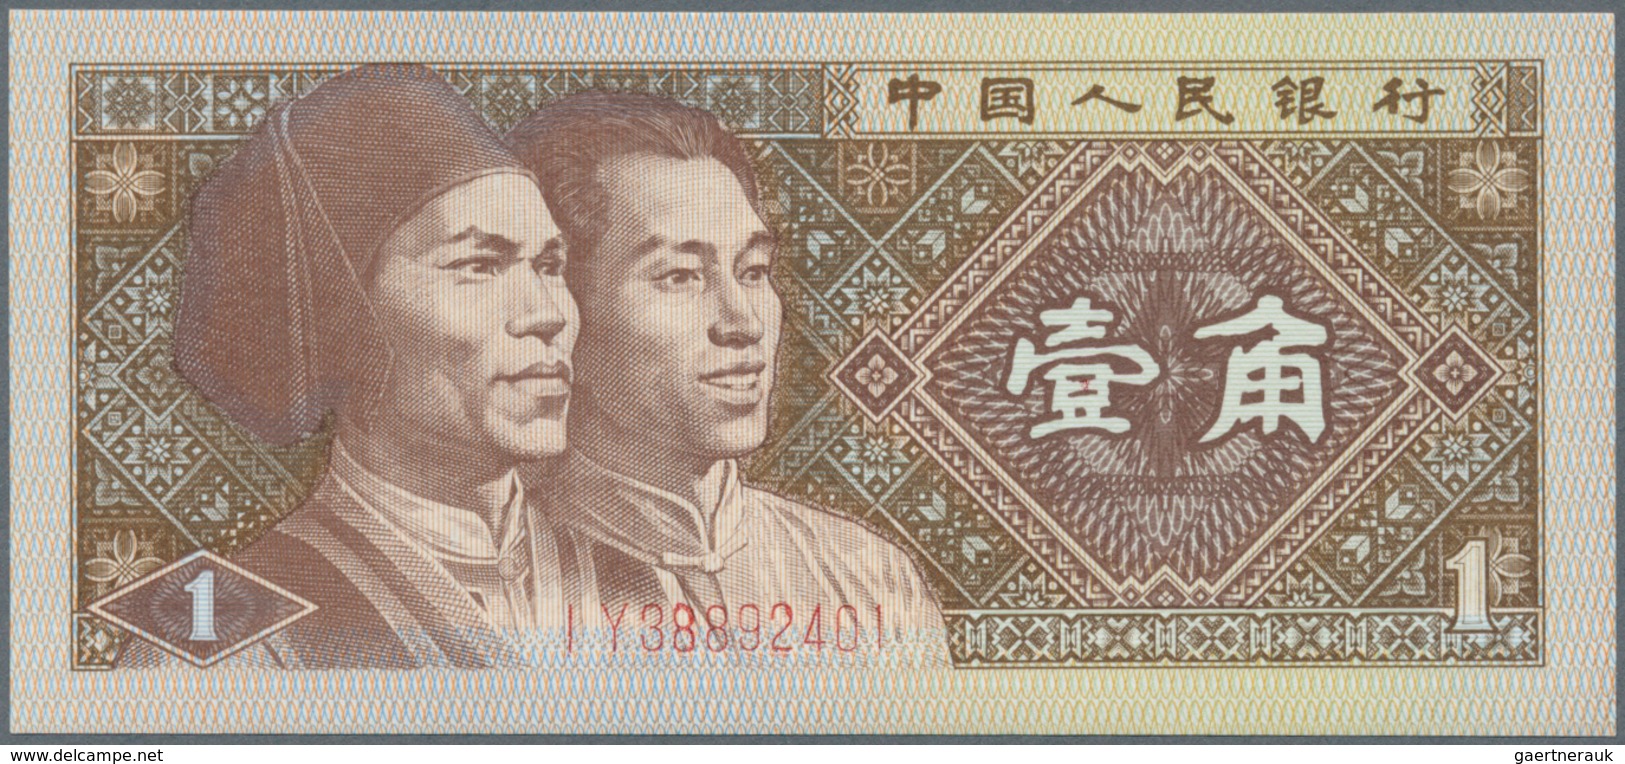 China: Bundle With 100 Pcs. 1 Jiao 1980 With Running Serial Numbers And In UNC Condition. (100 Pcs.) - China